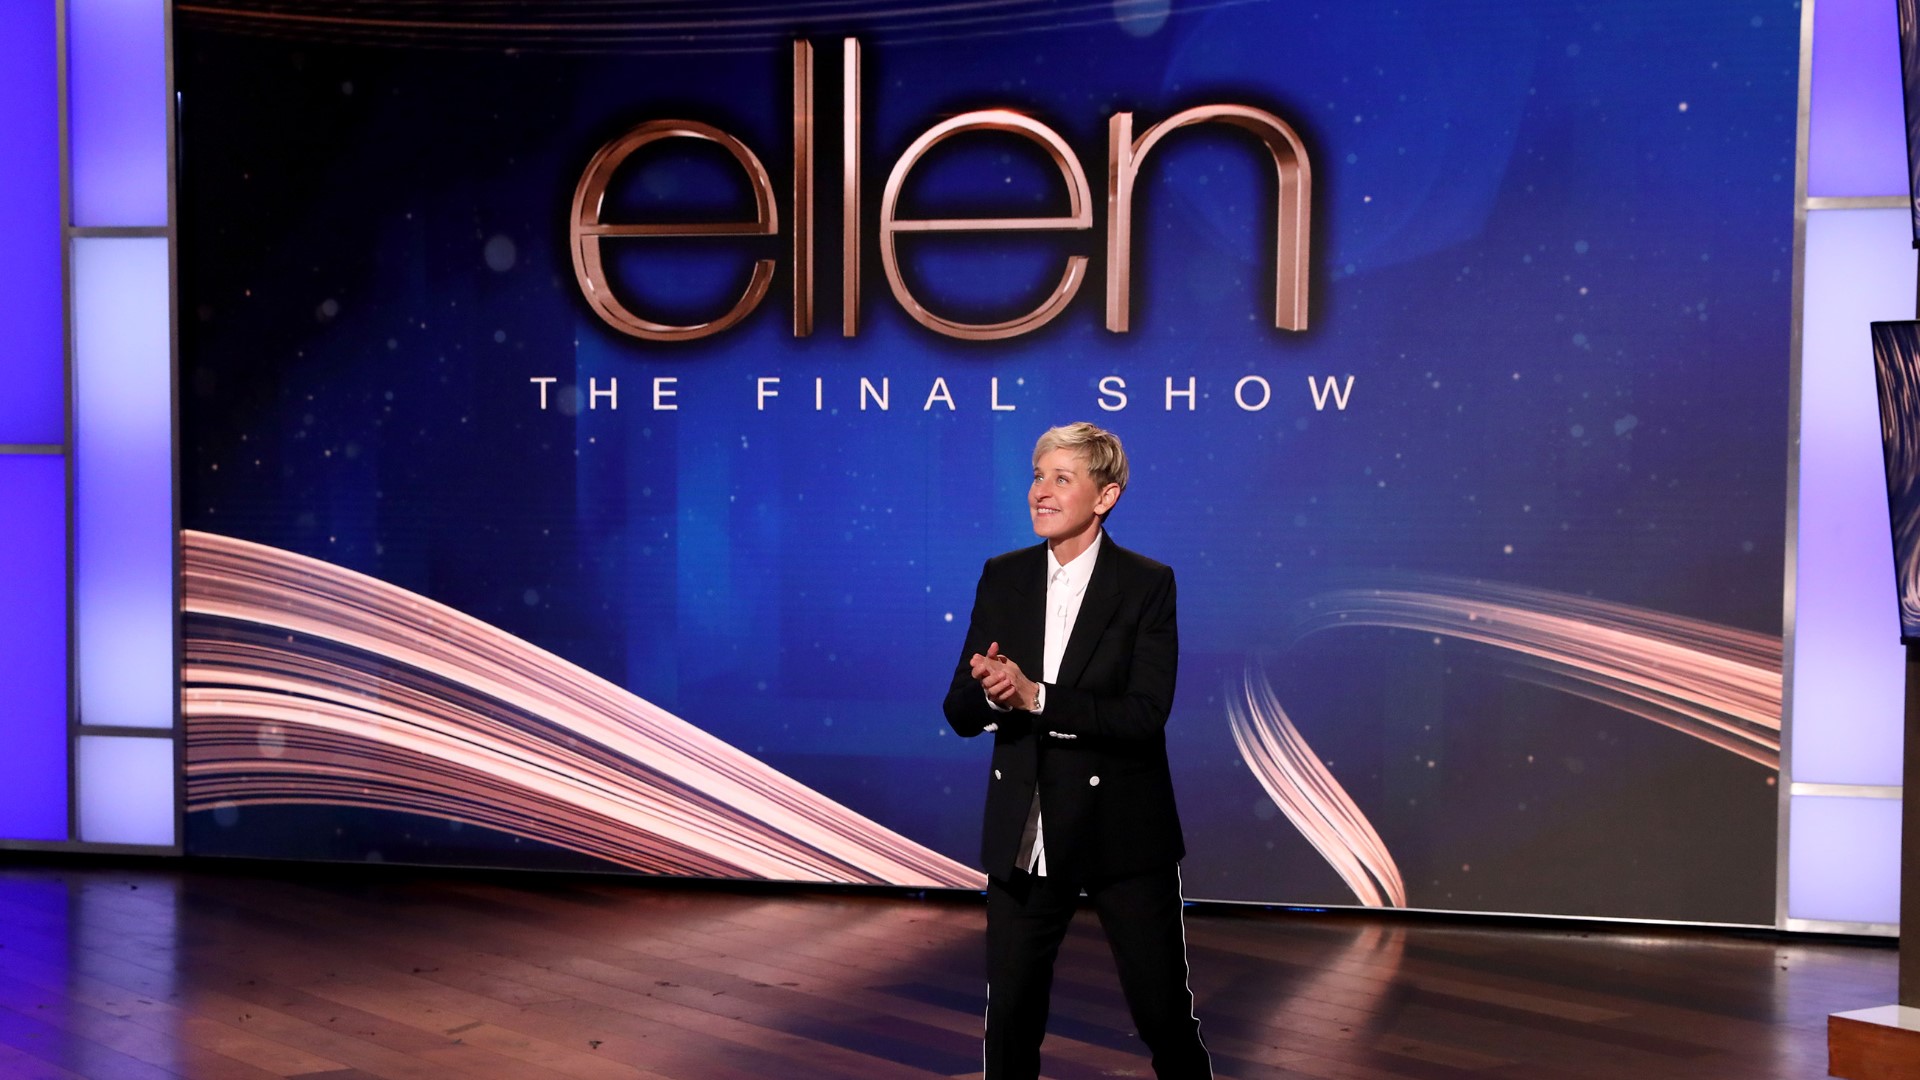 Daytime staple Ellen DeGeneres says goodbye to her talk show after 19 seasons, today at 4:00 on 11Alive.